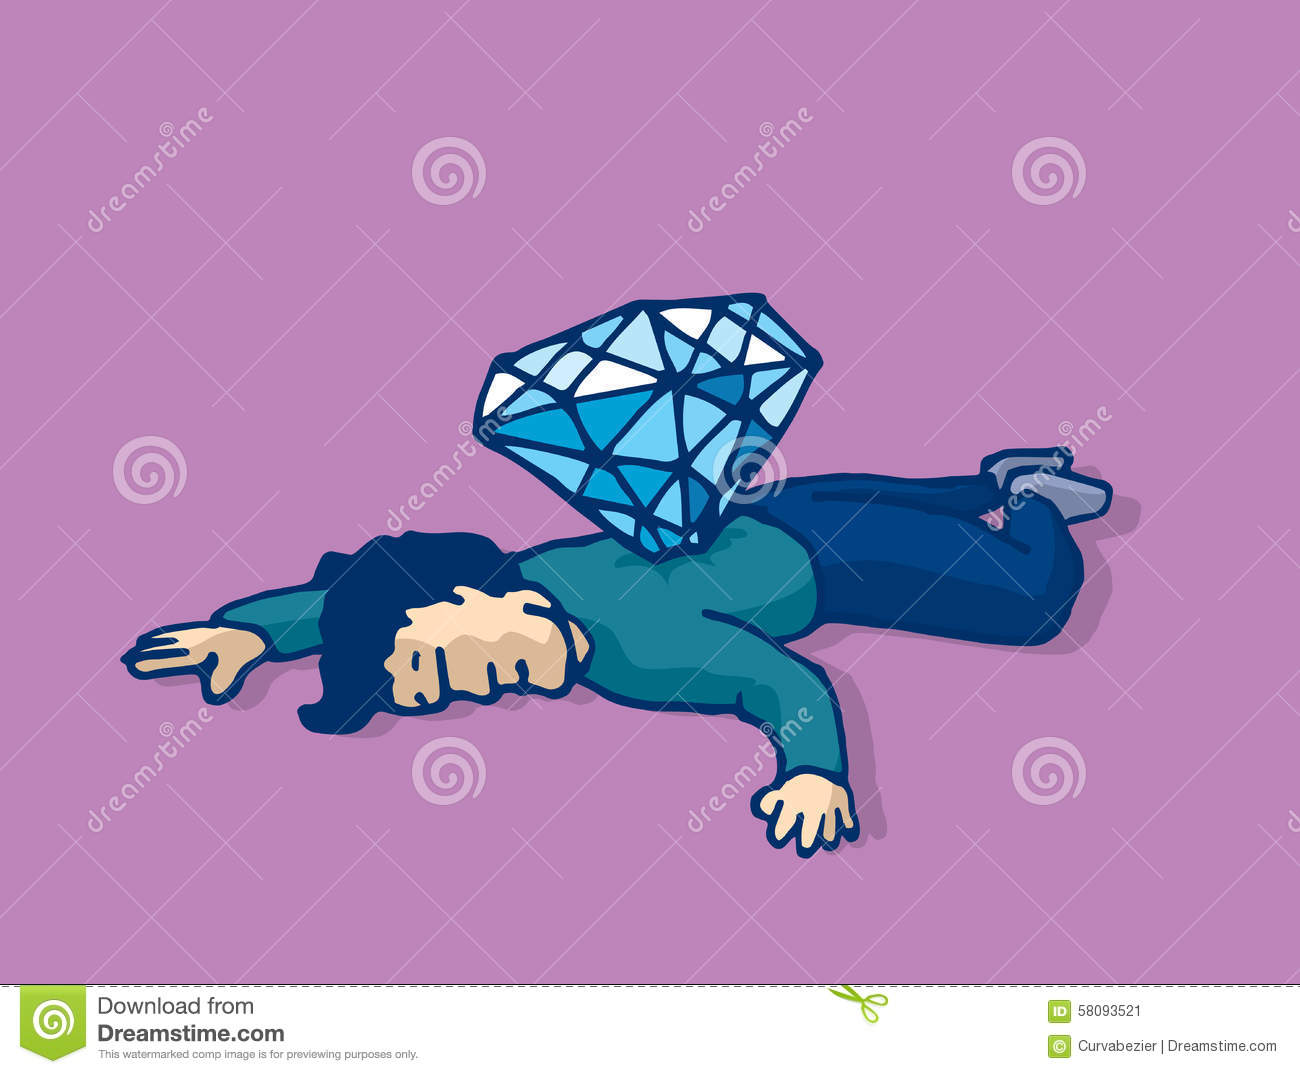 Dead Man Stabbed With Diamond Murdered For Money Stock Vector.